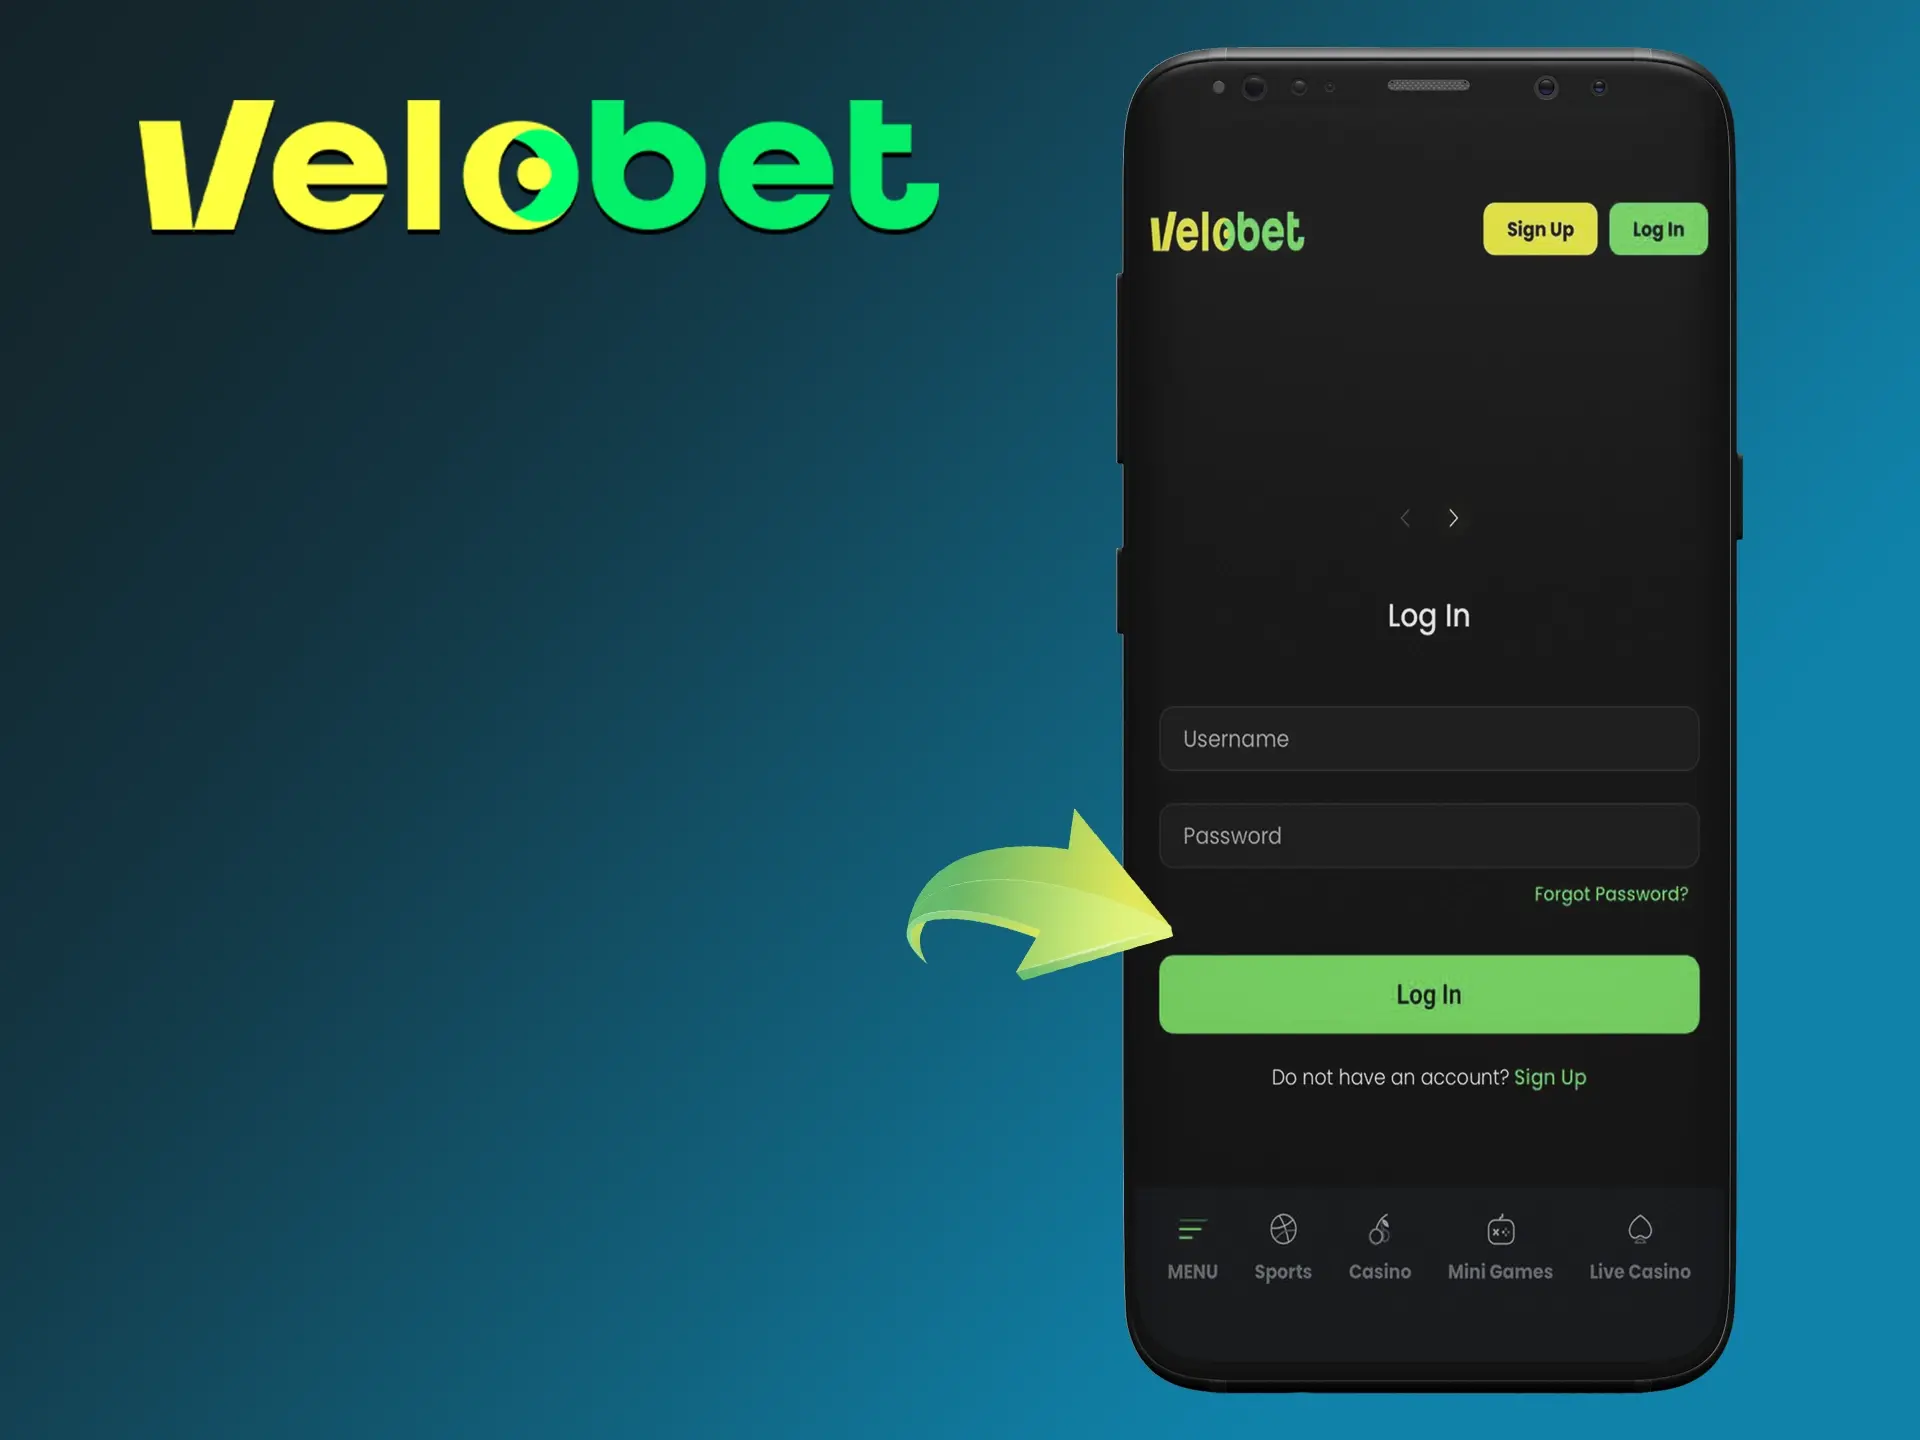 Log in to your account on the Velobet app and get emotionally charged with wins.